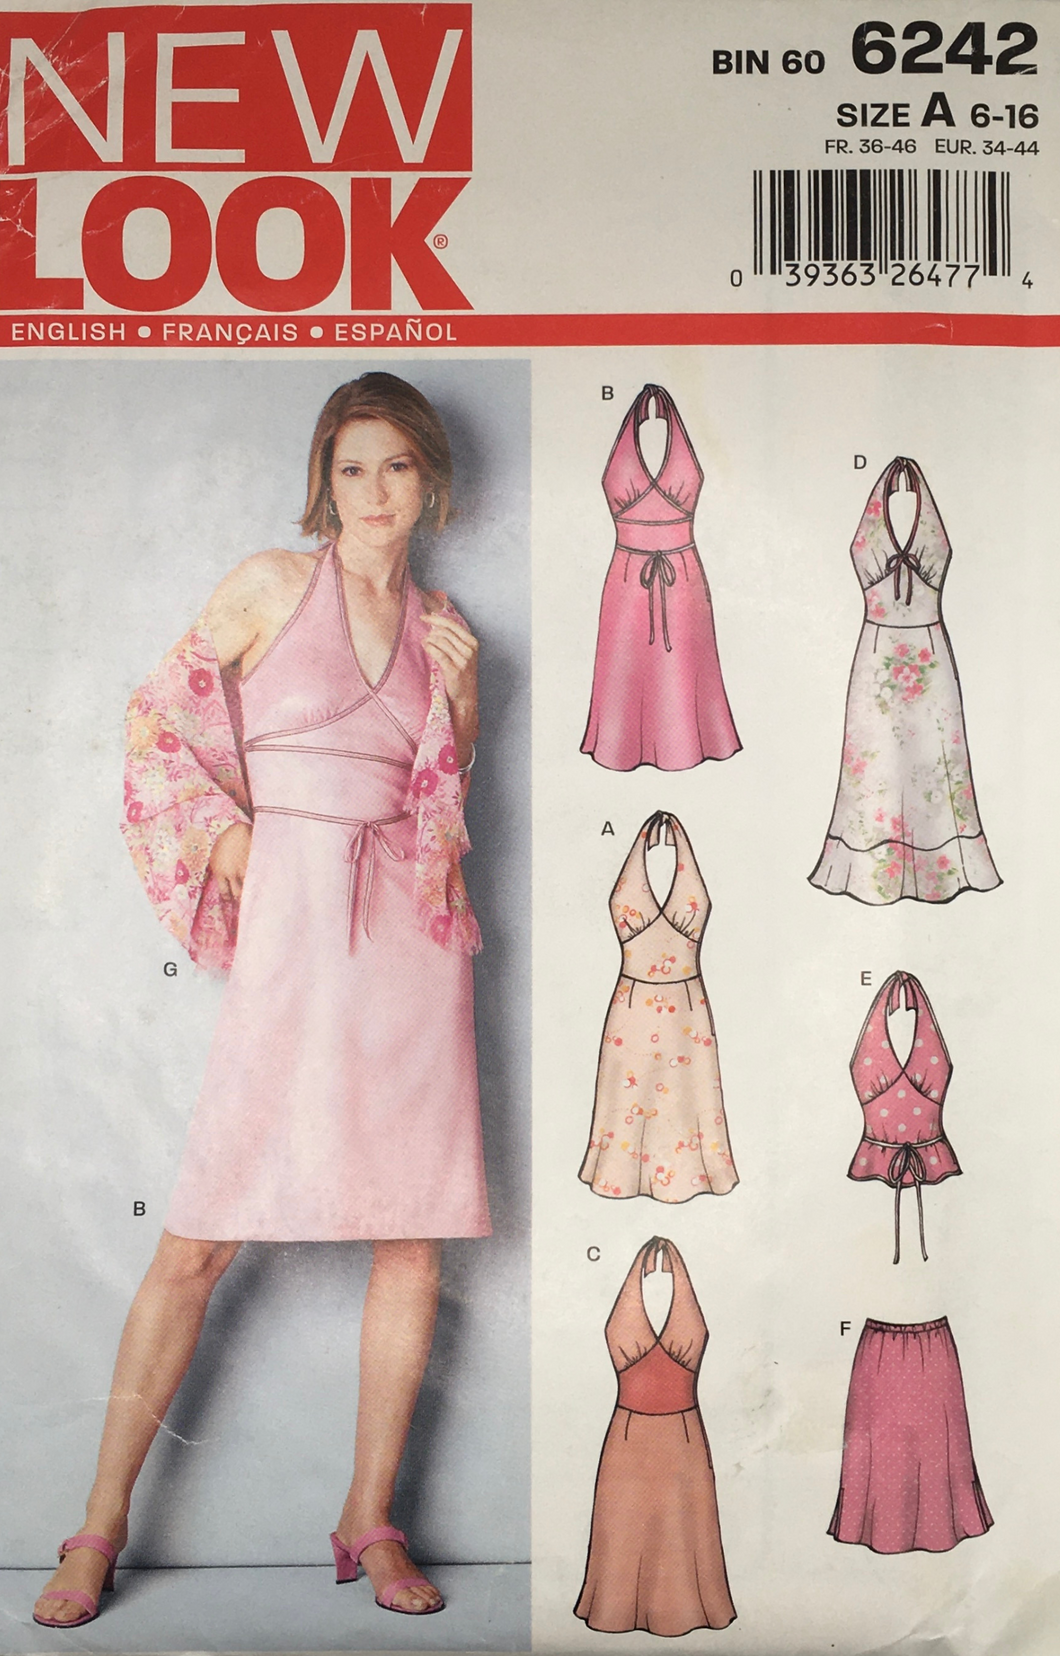 2003 Sewing Pattern: New Look 6242